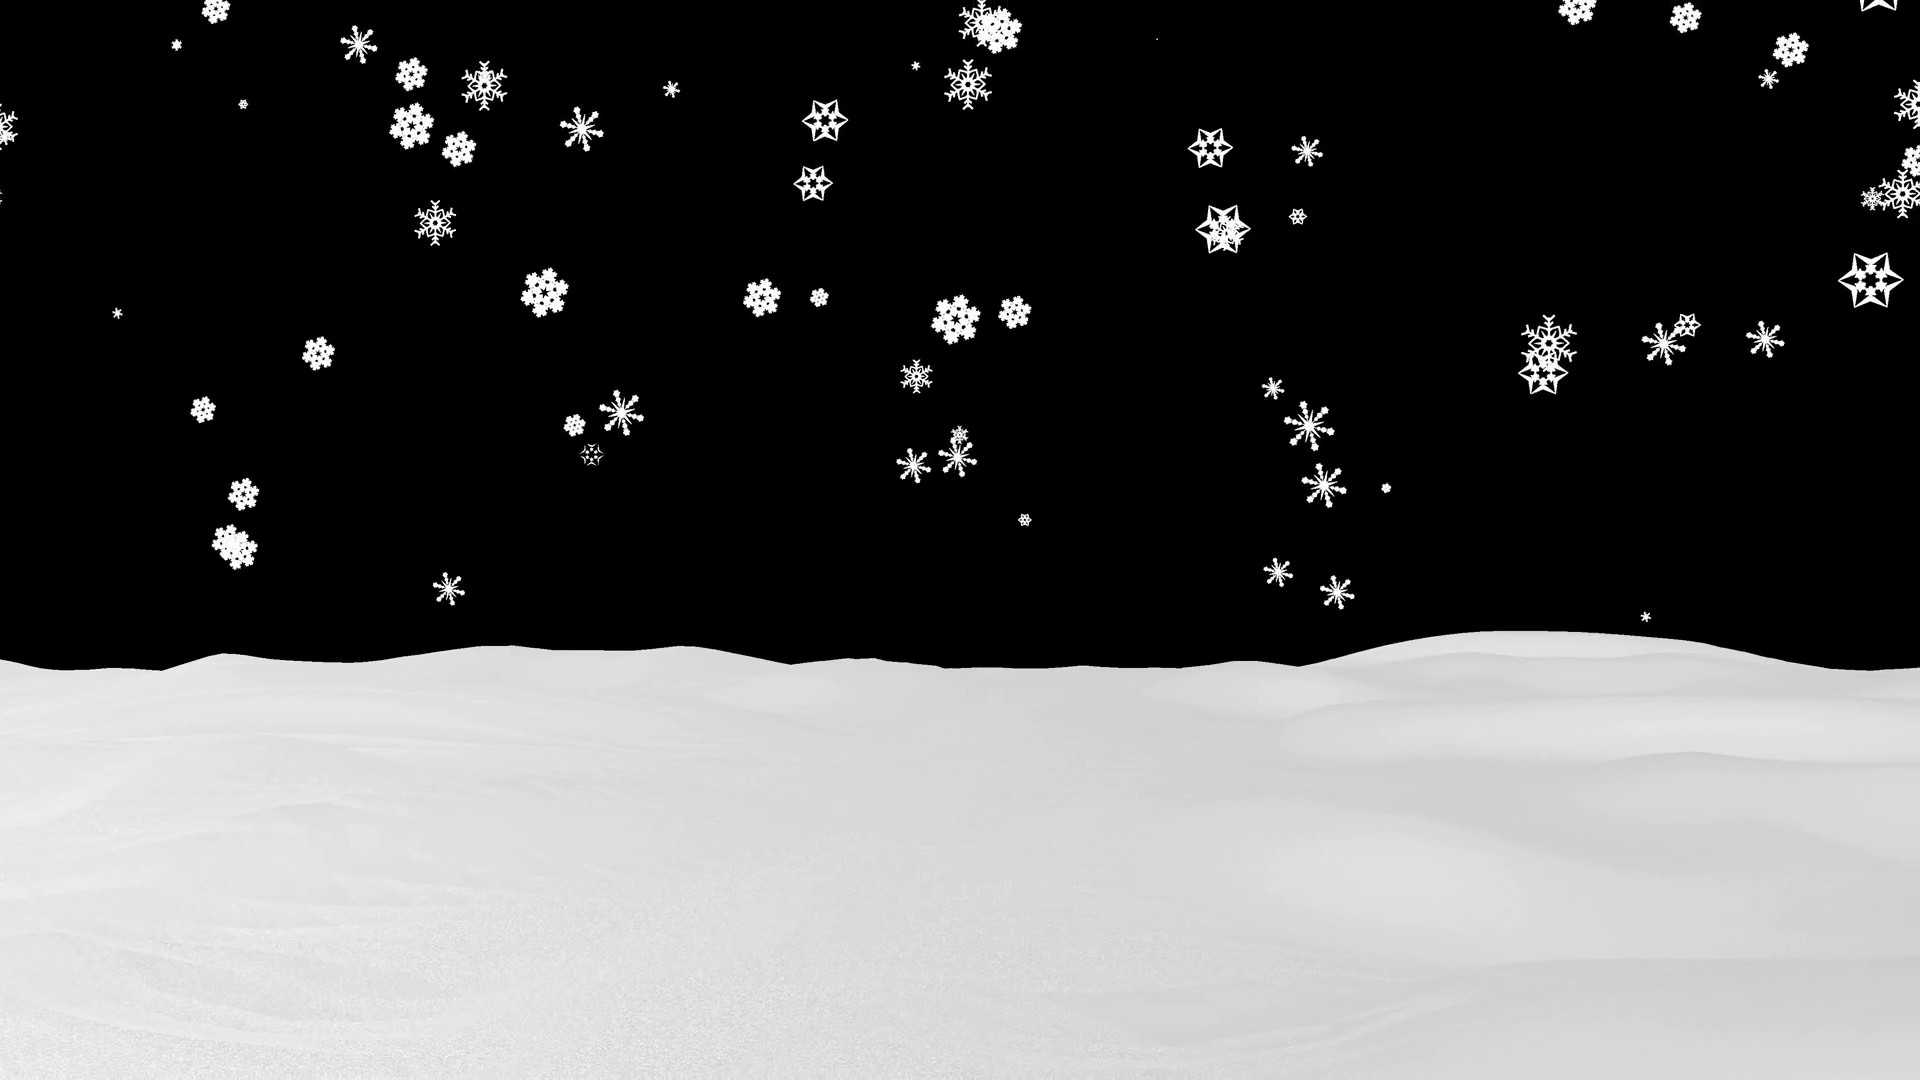 1920x1080 Snowman and snowing background - pan right. Christmas theme. Red background  - see green screen variant if you want to change background color Motion ...